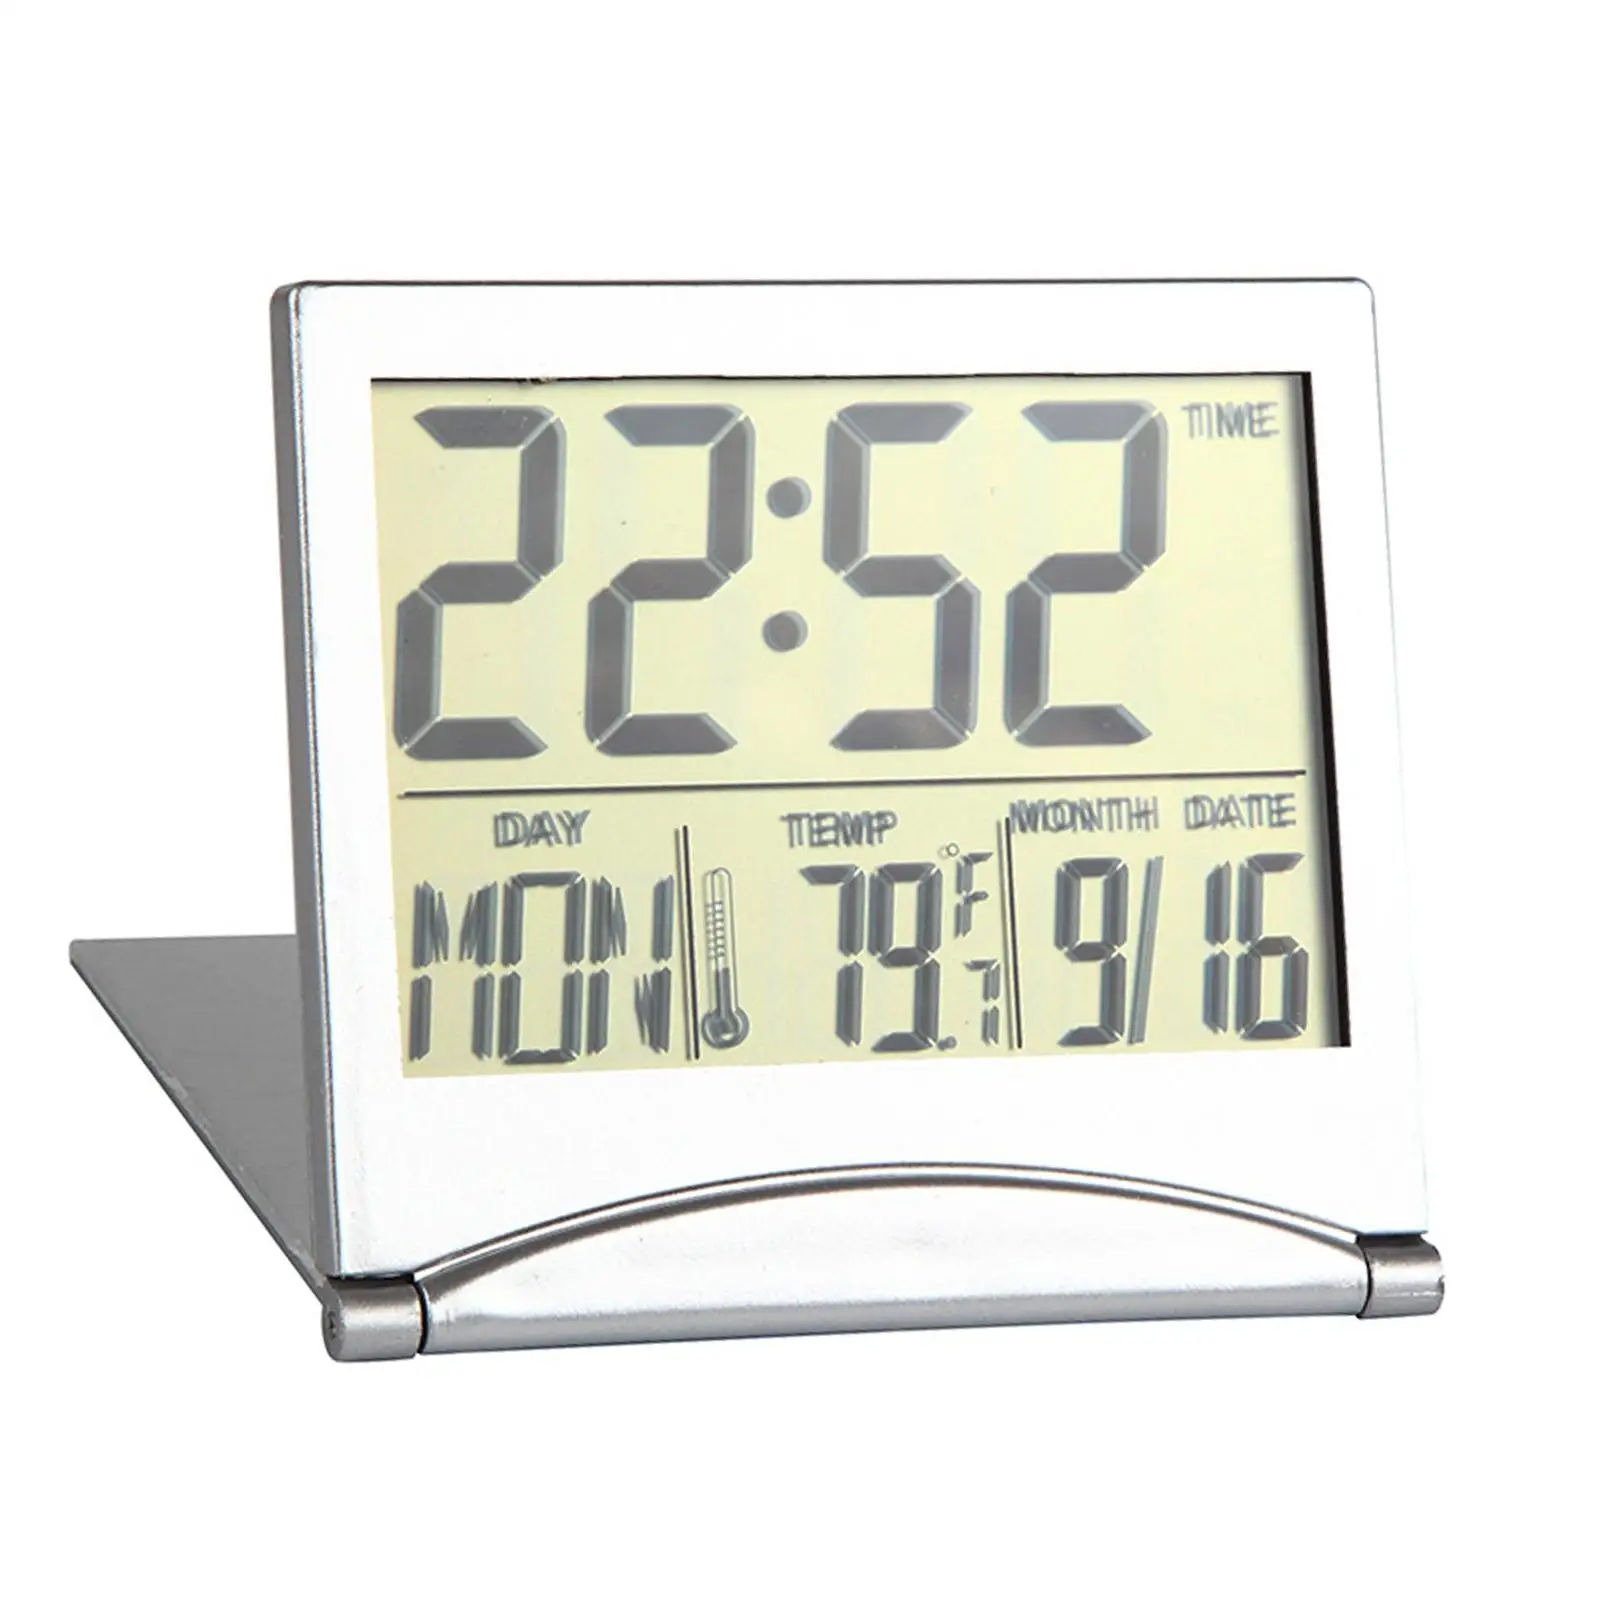 LCD Display Digital Travel Alarm Clock Snooze Mode Calendar Reminders Battery Operated Foldable Compact Desk Clock for Training